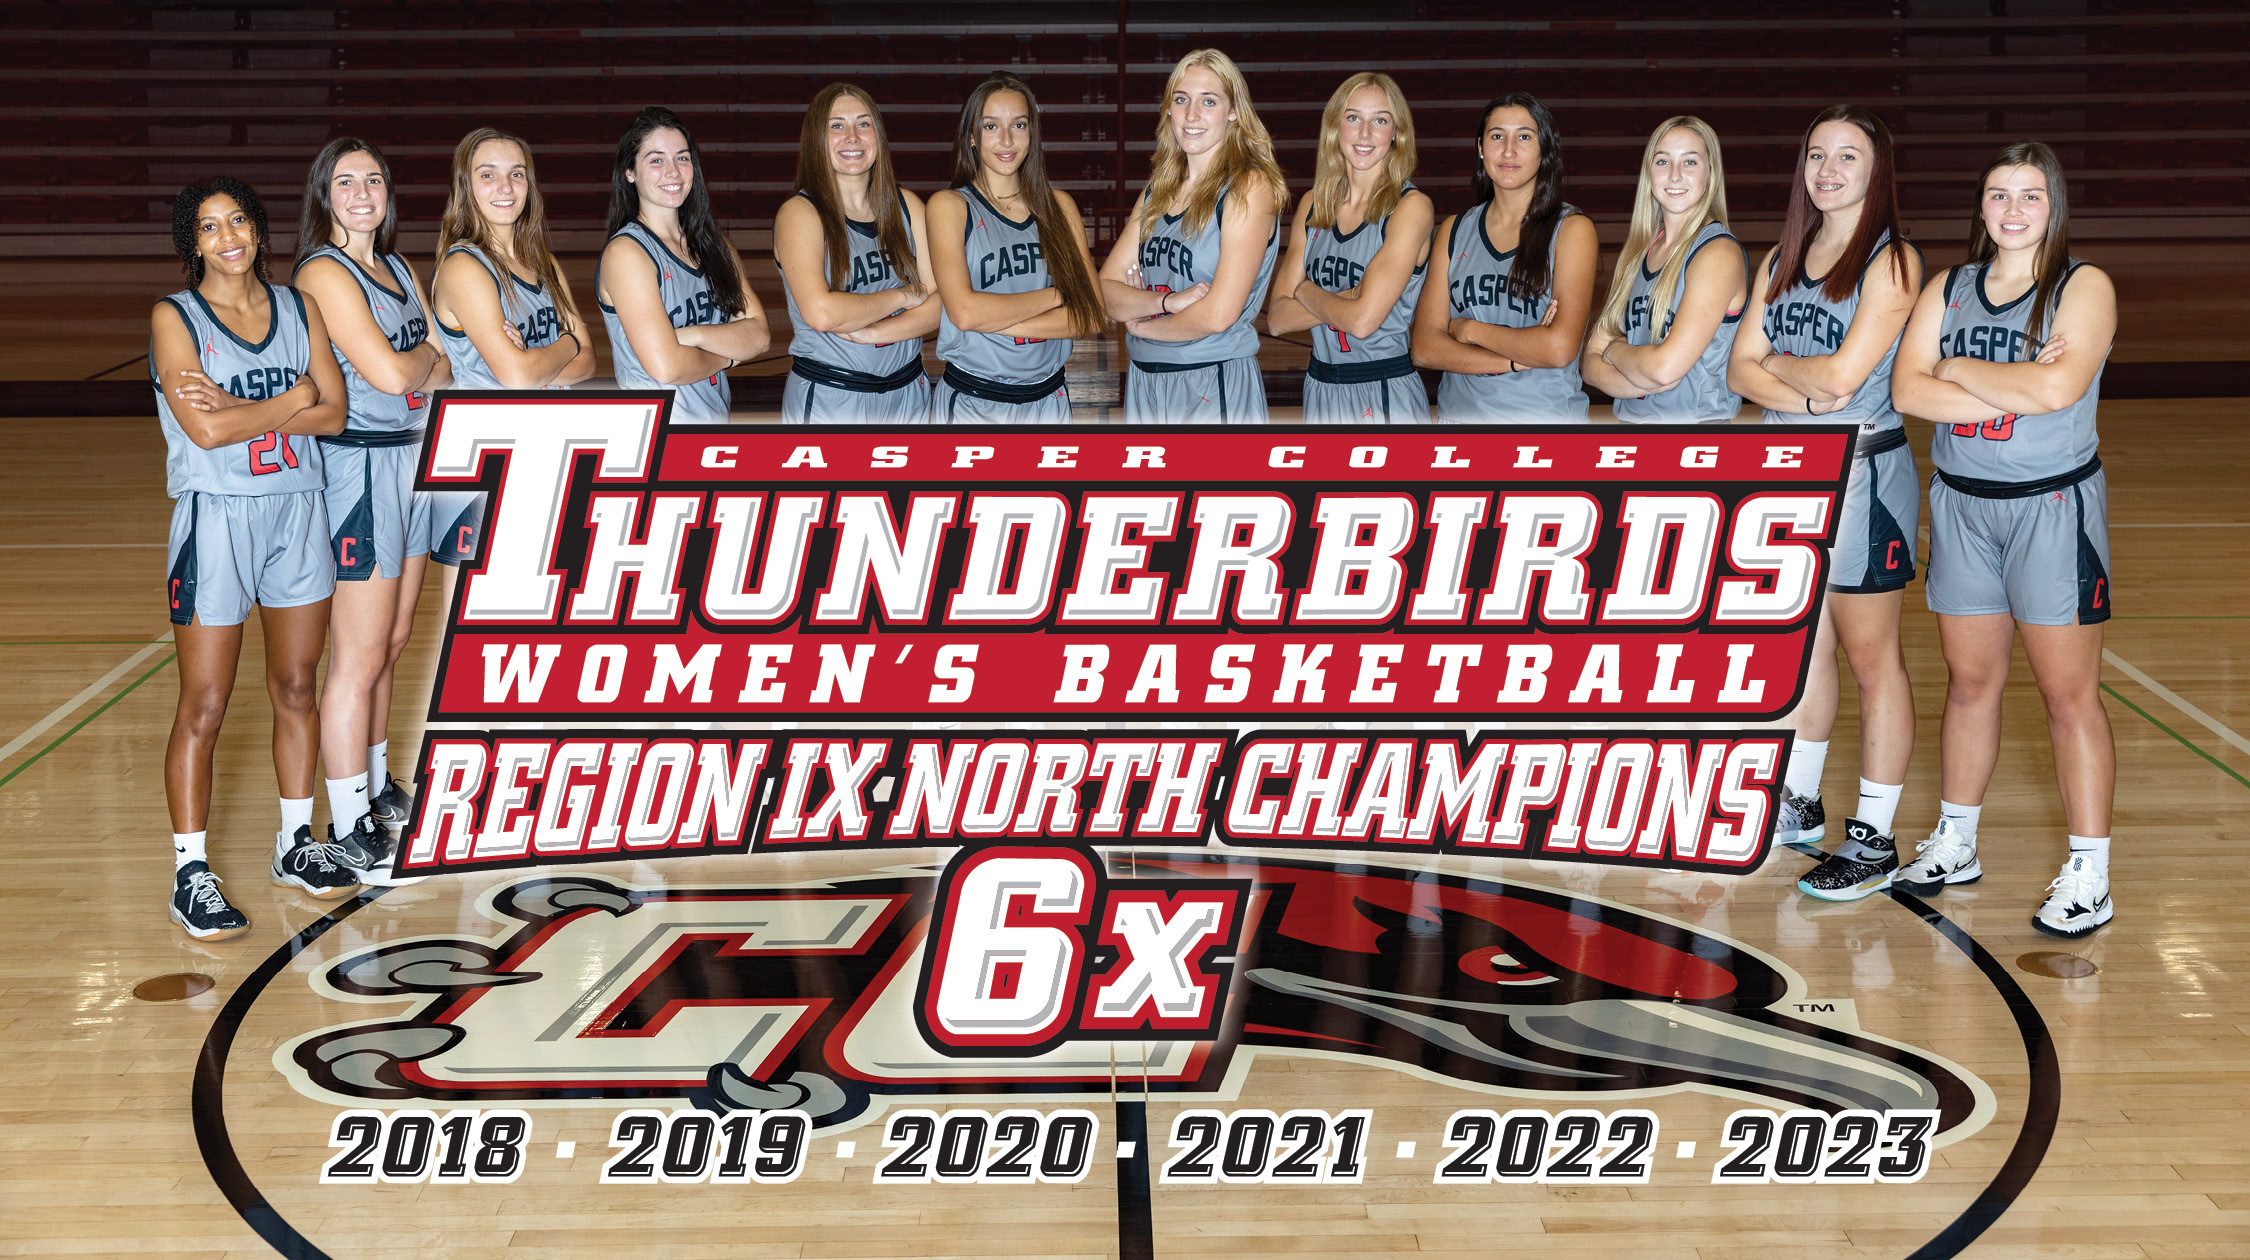 Lady T-Birds Capture Region IX North Title for Sixth Year in a Row. Team image.